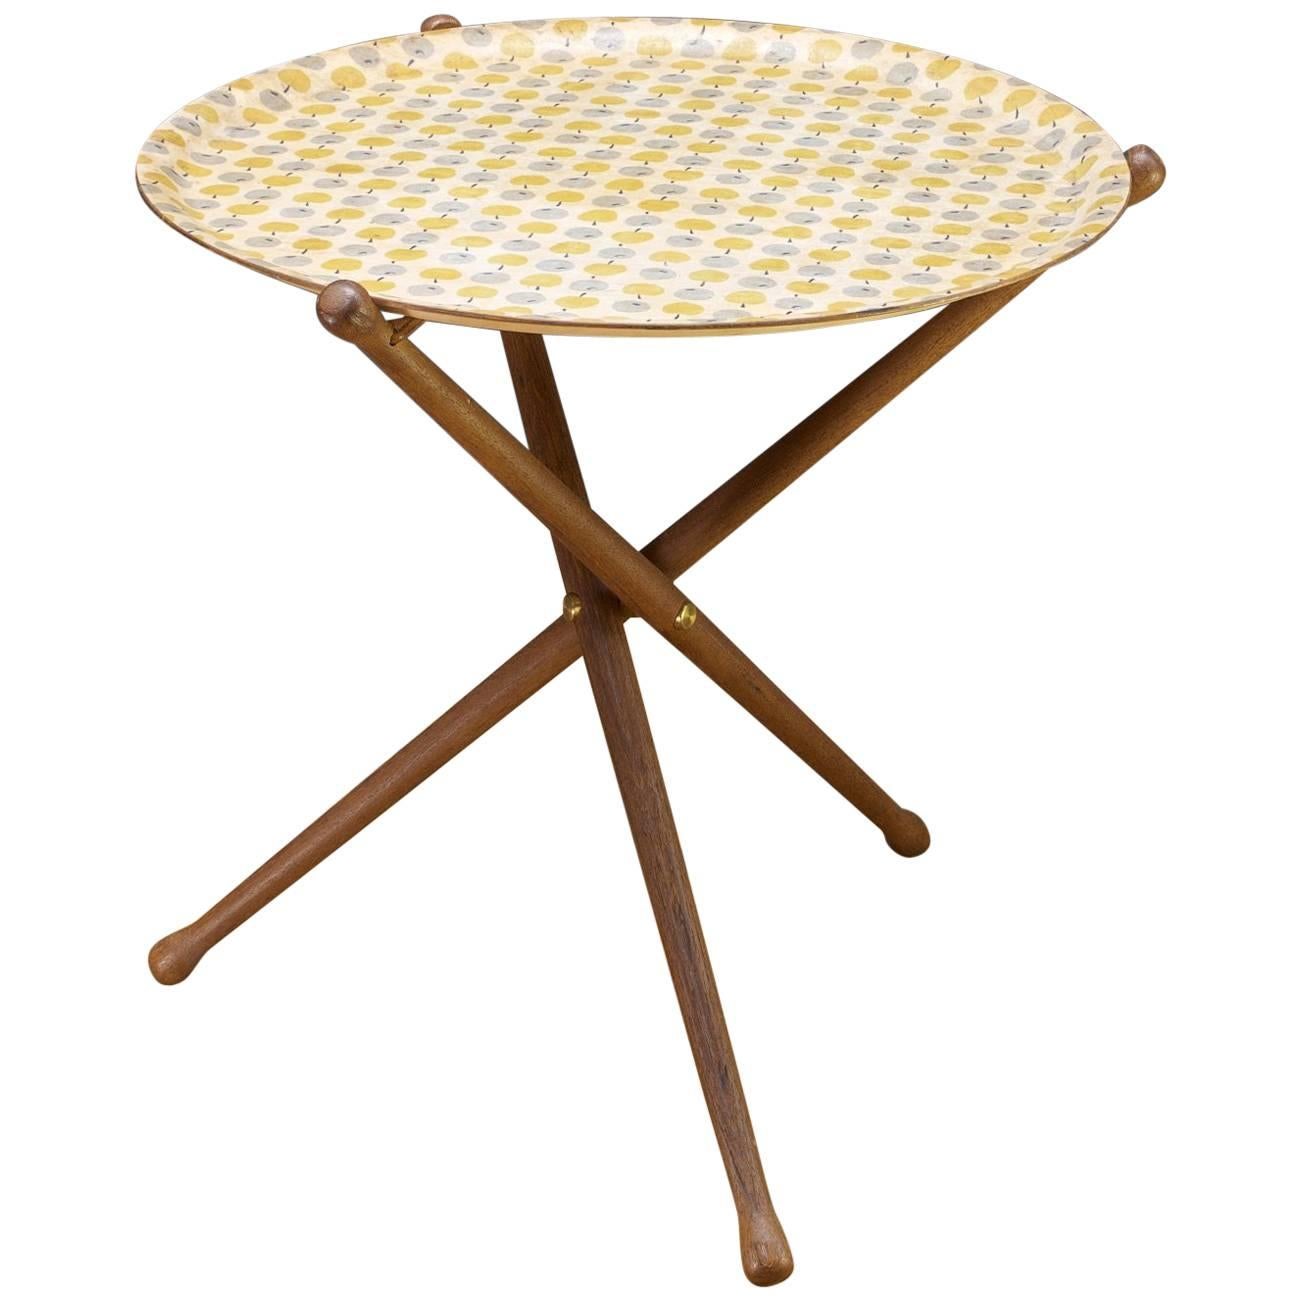 Nils Trautner Tripod Teak Table with Astrid Sampe Apple Pattern Tray For Sale